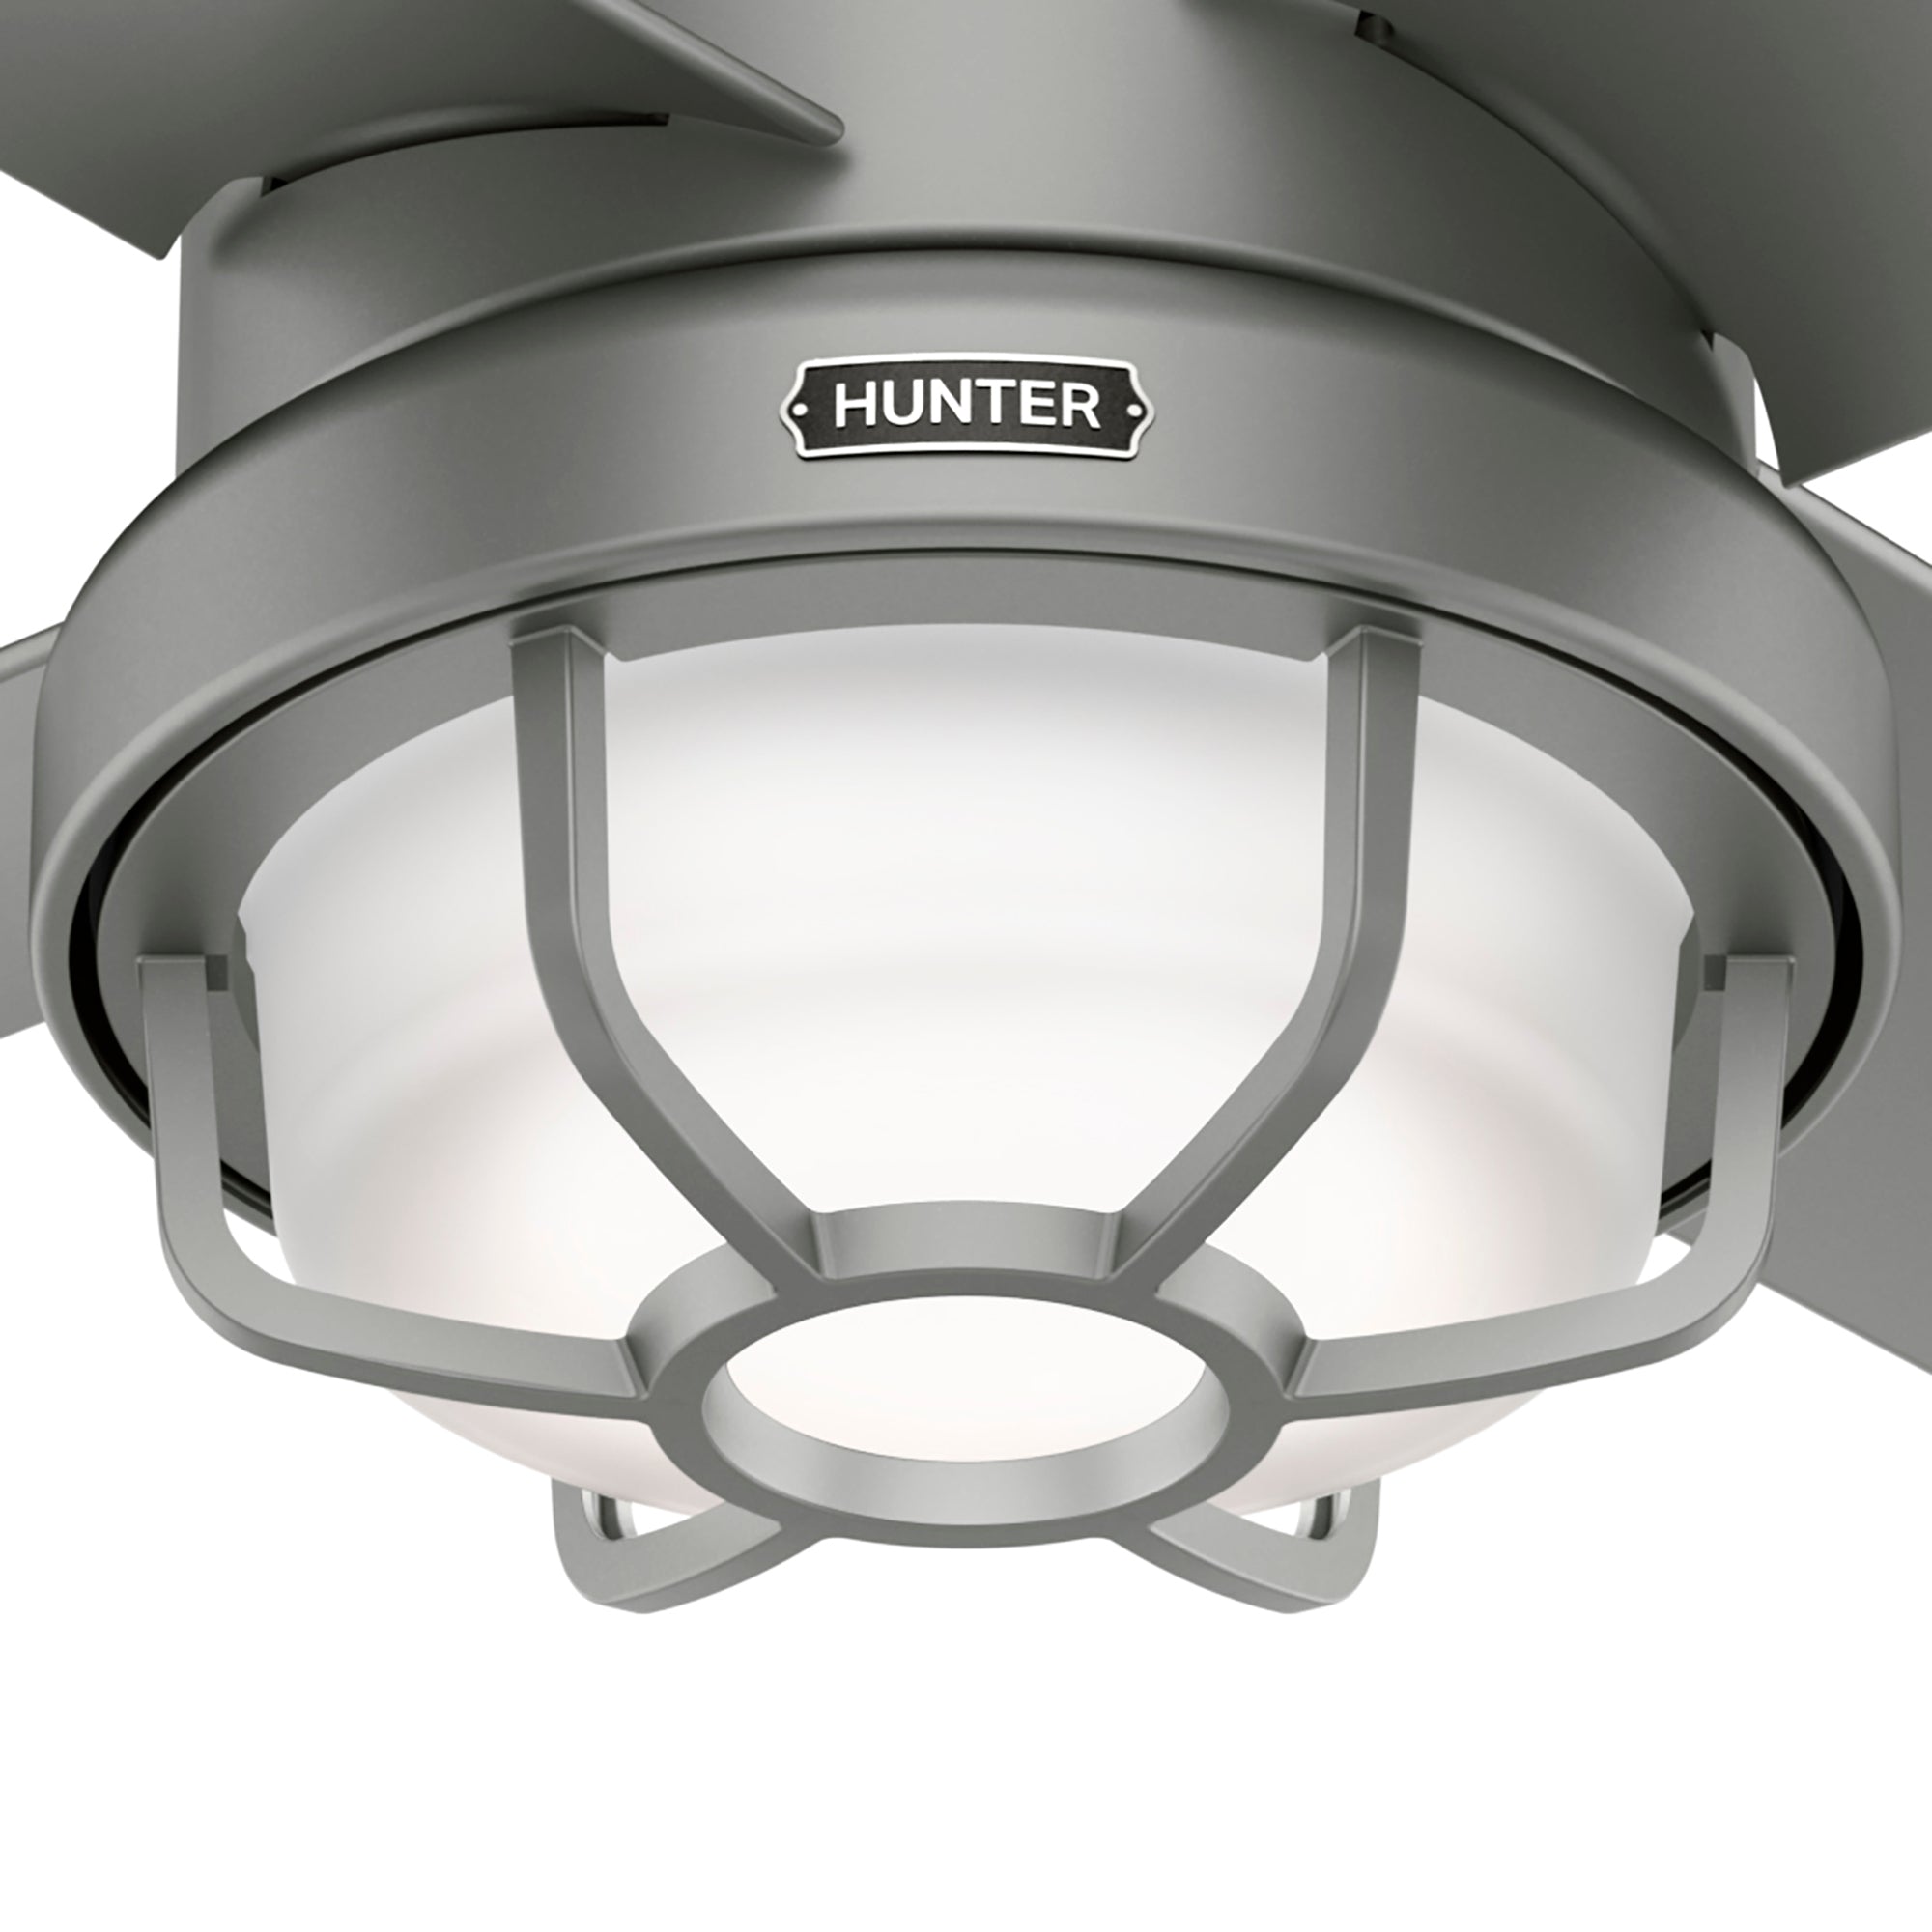 Hunter 54 inch Searow Indoor / Outdoor Ceiling Fan with LED Light Kit and Wall Control